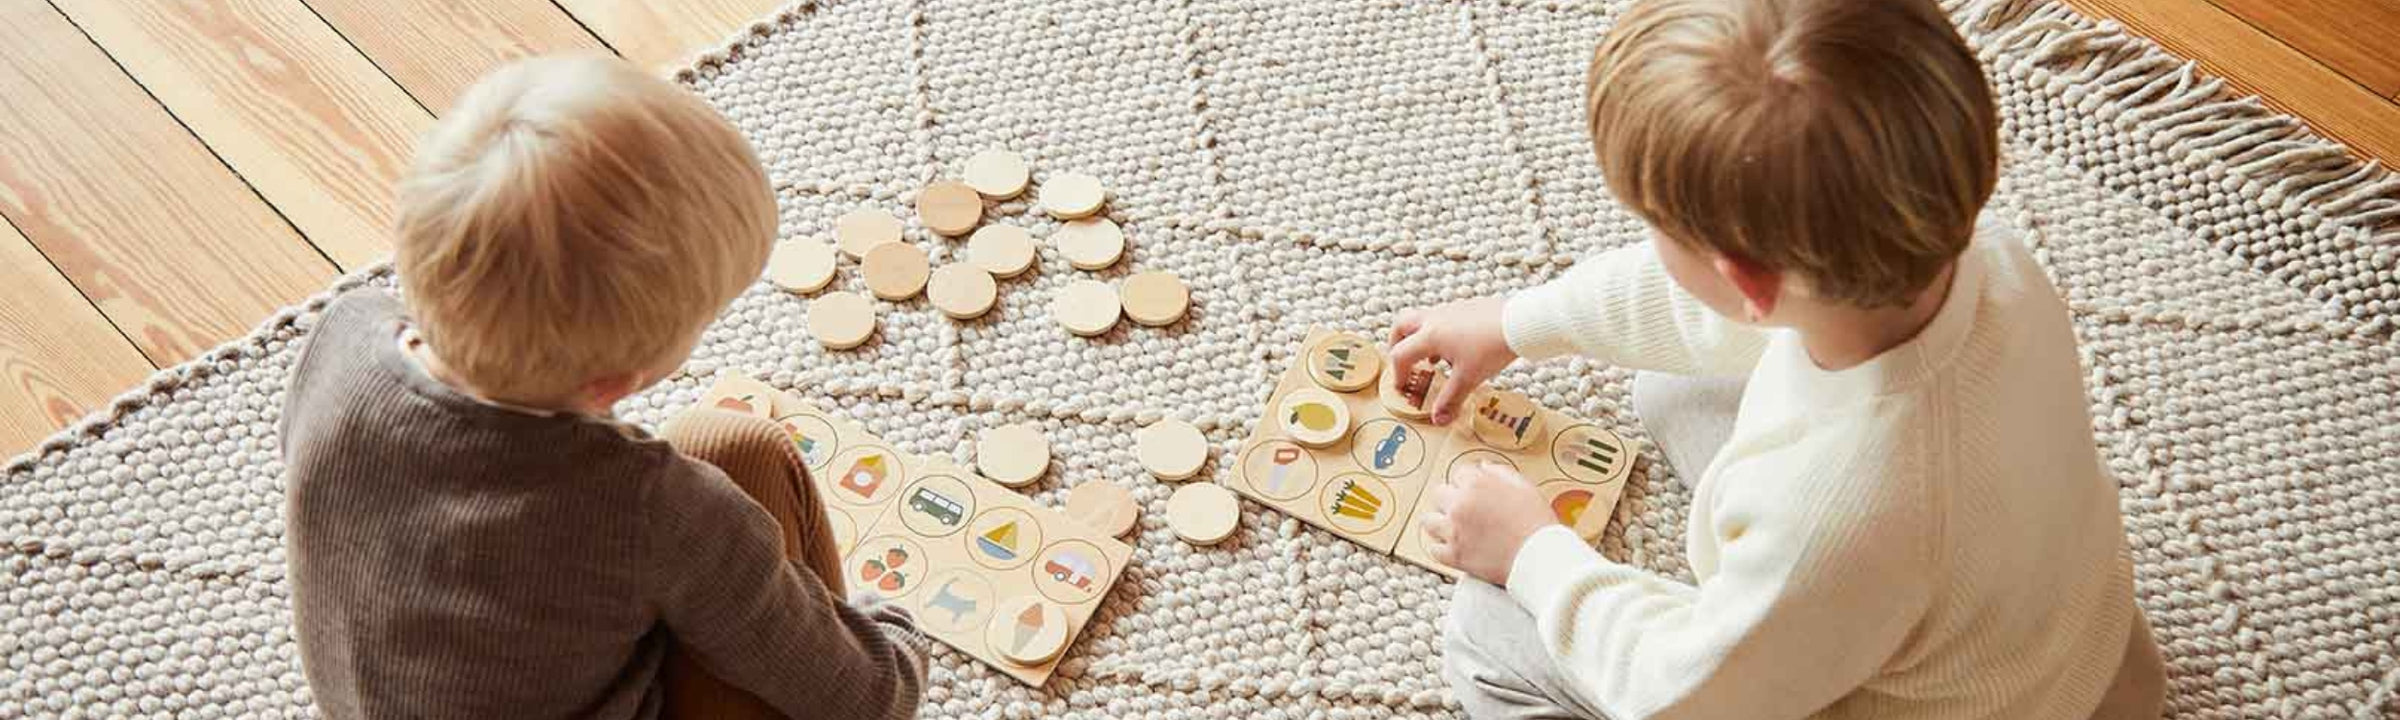 Child playing with wooden cognitive toys from FLEXA